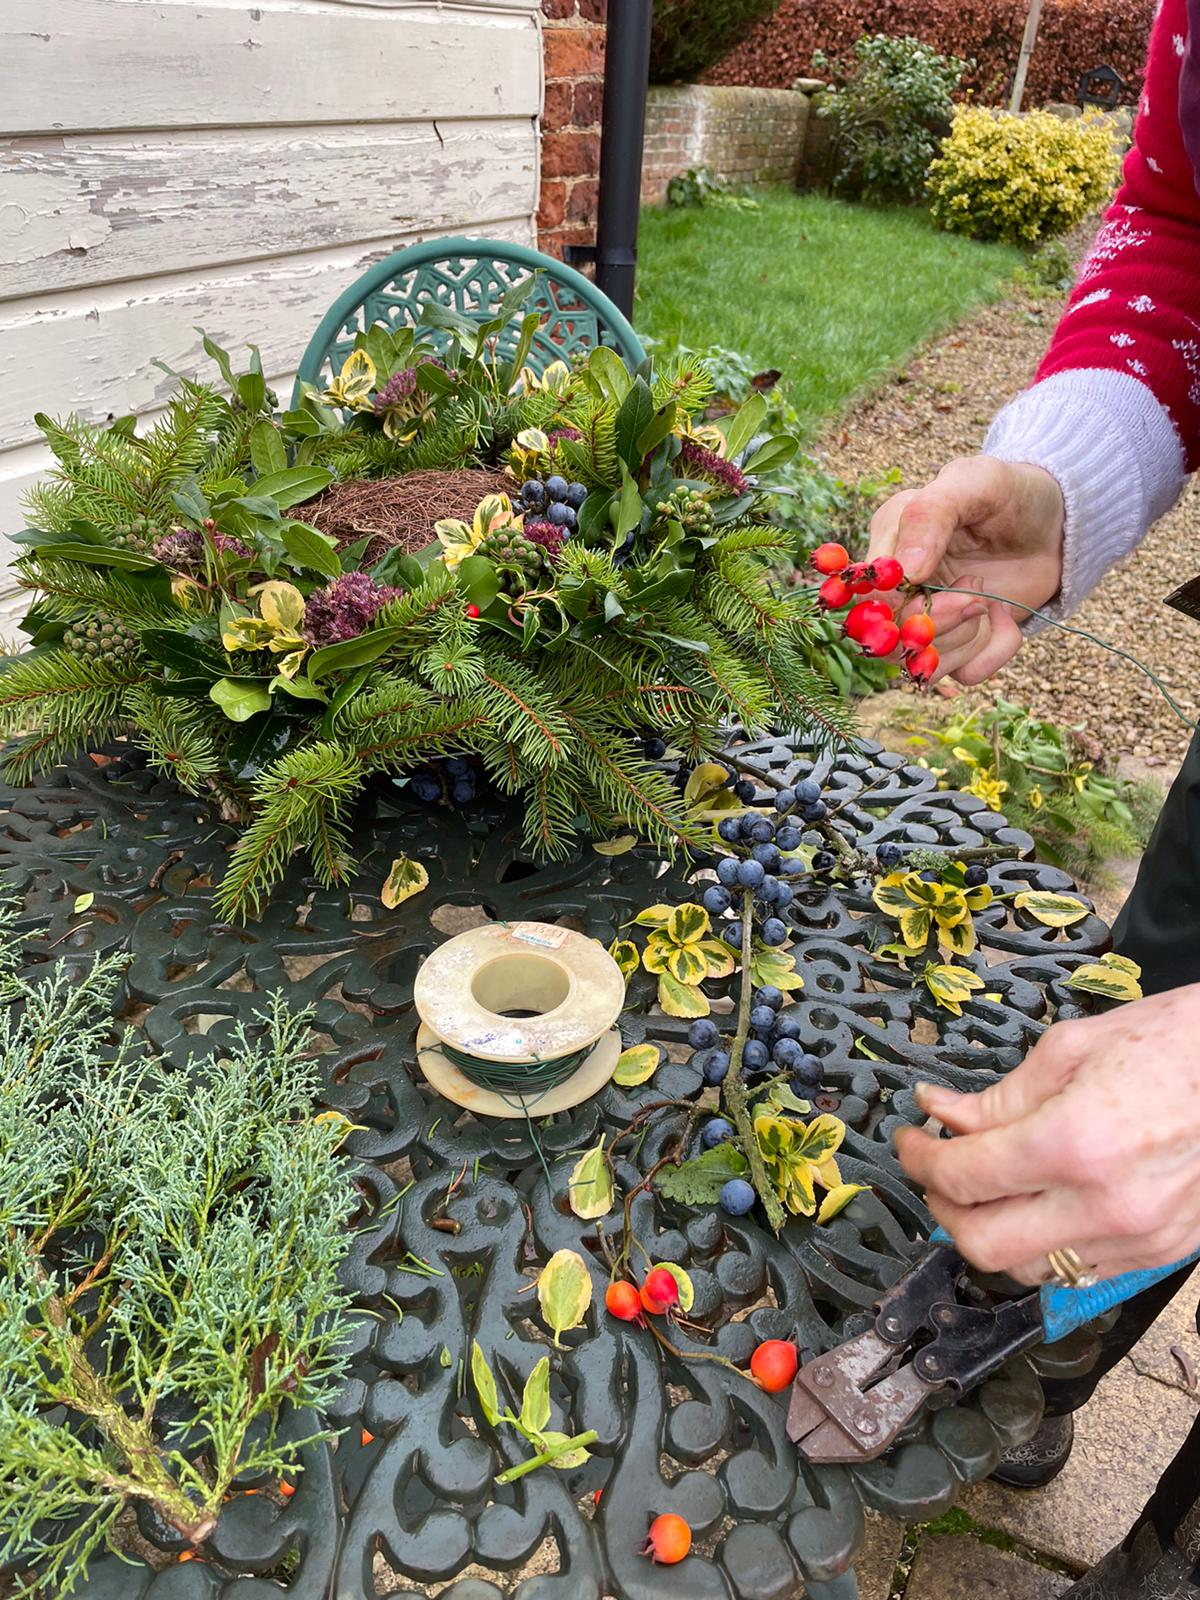 A womans hand is shown decorating a wreath with green foliage on a green wrought iron round garden table